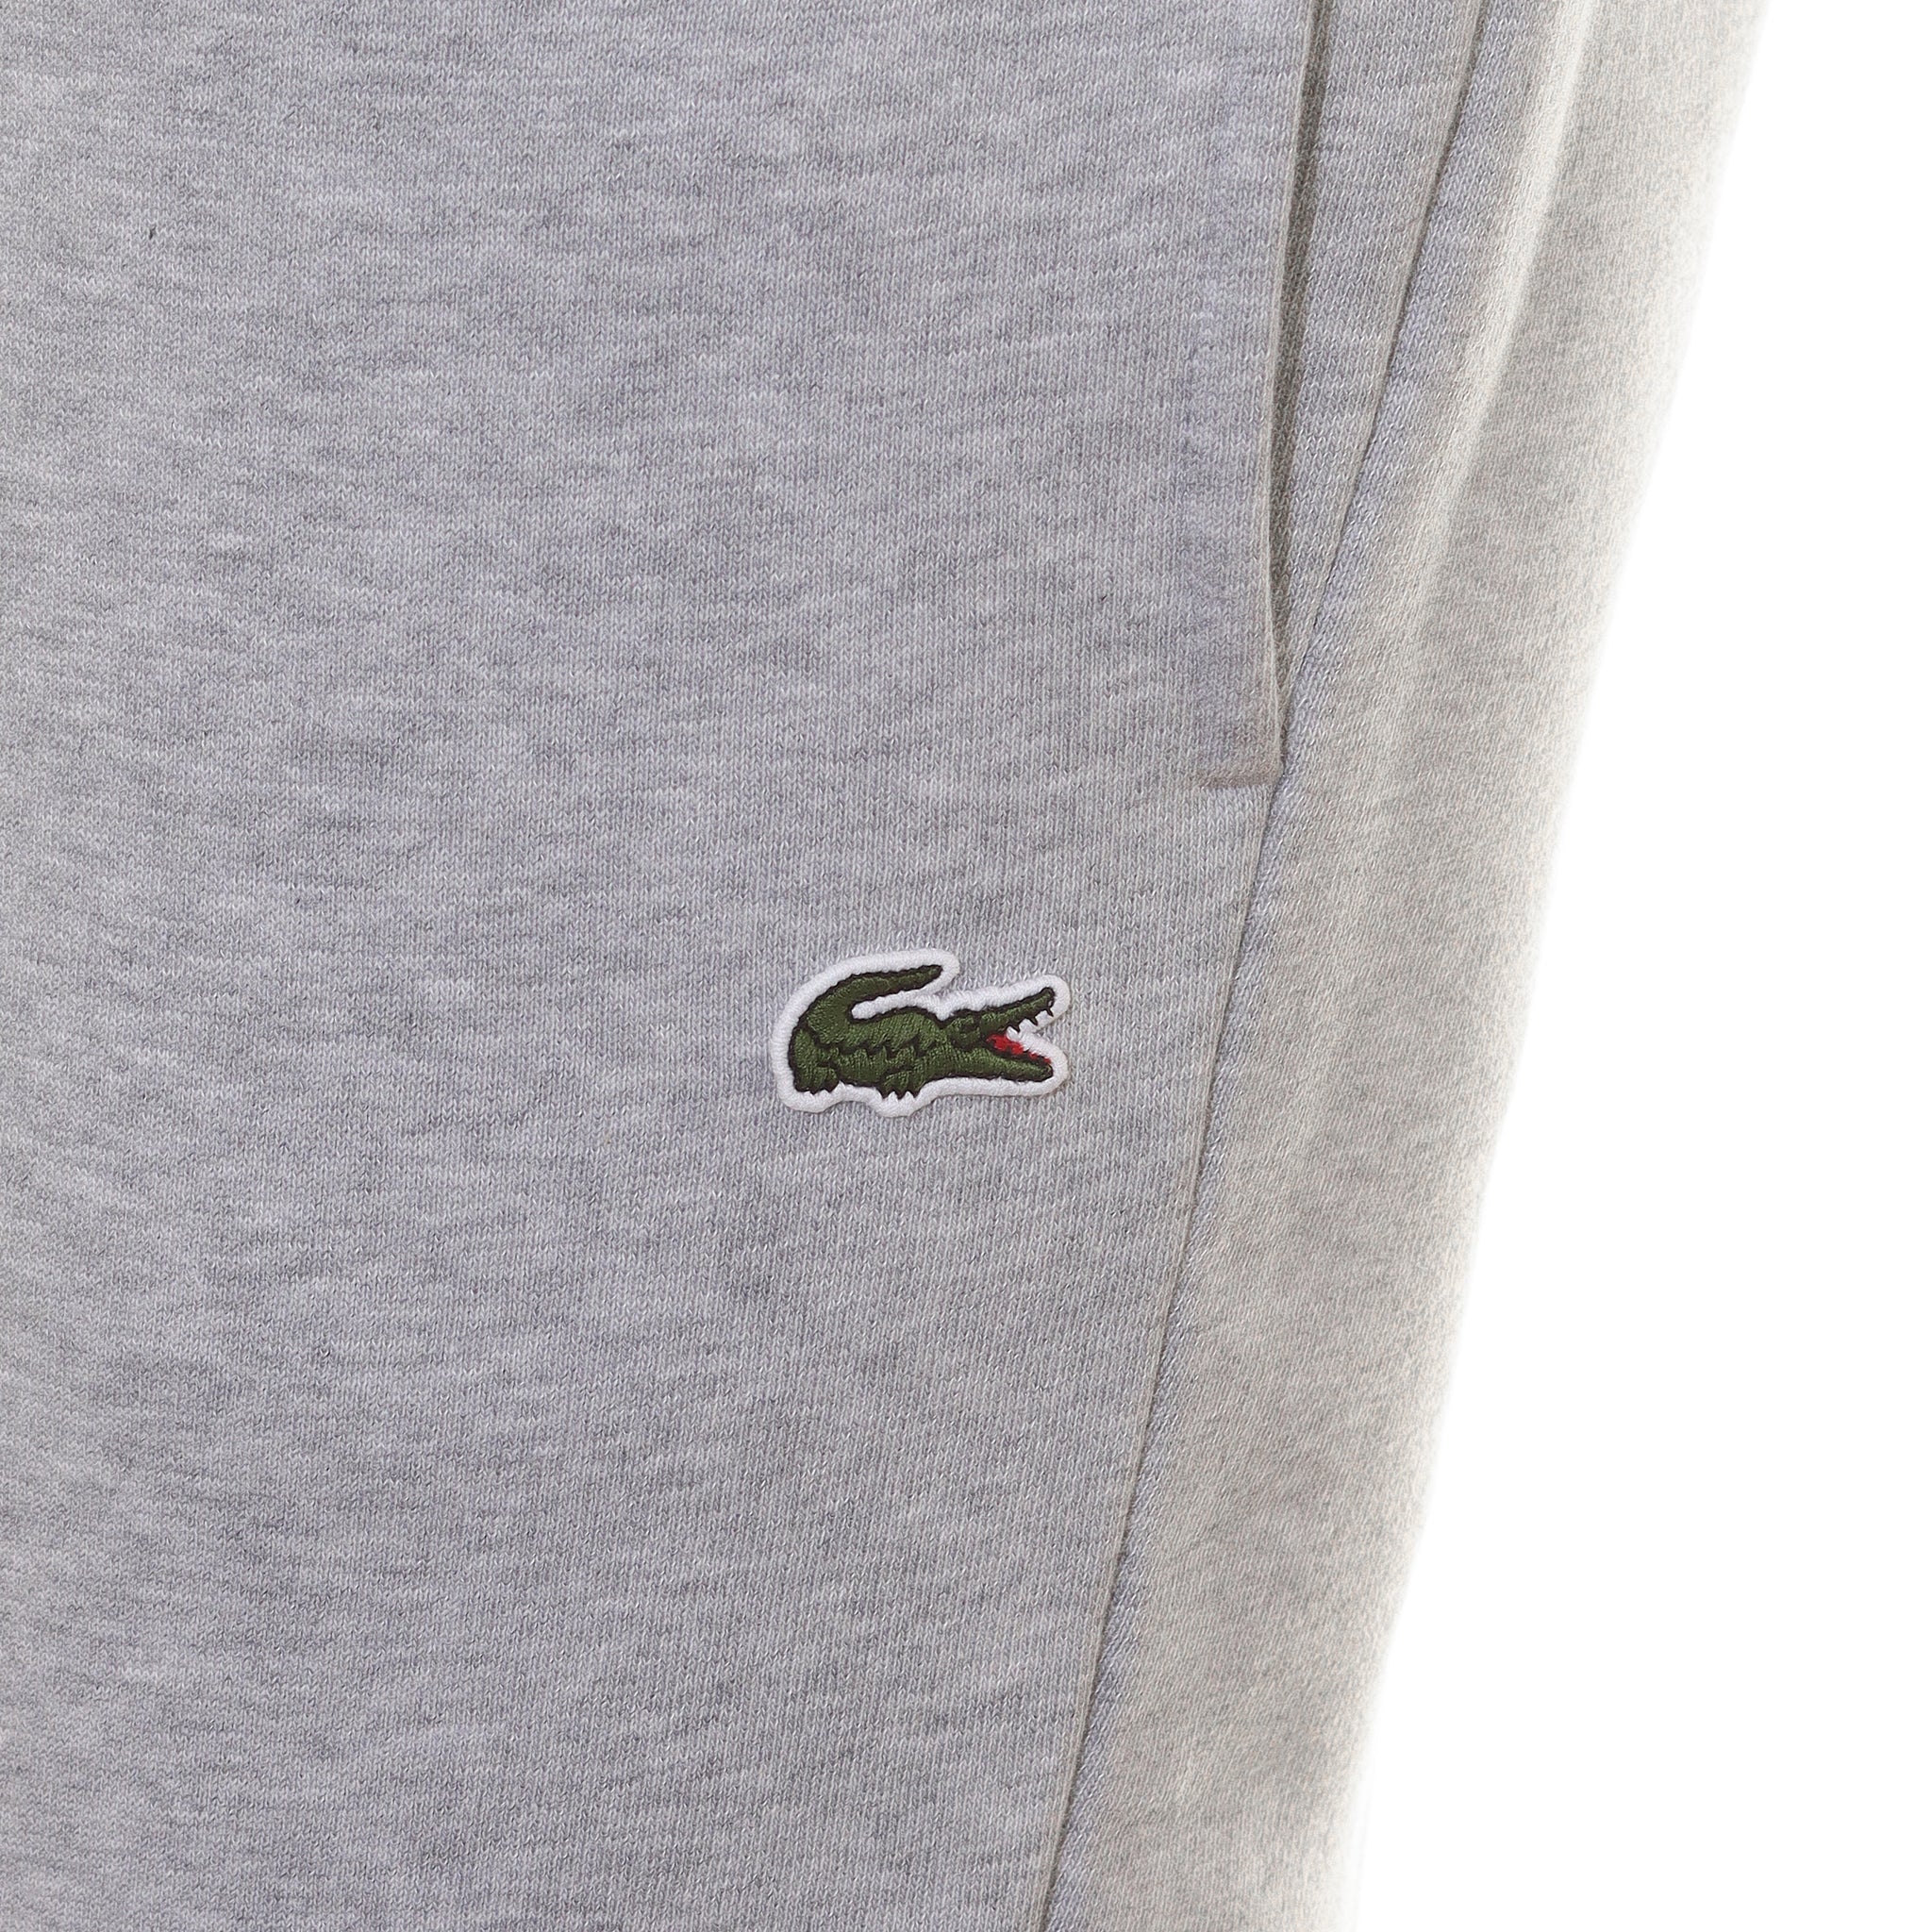 Lacoste Brushed Fleece Track Pant Silver Chine - 80s Casual Classics